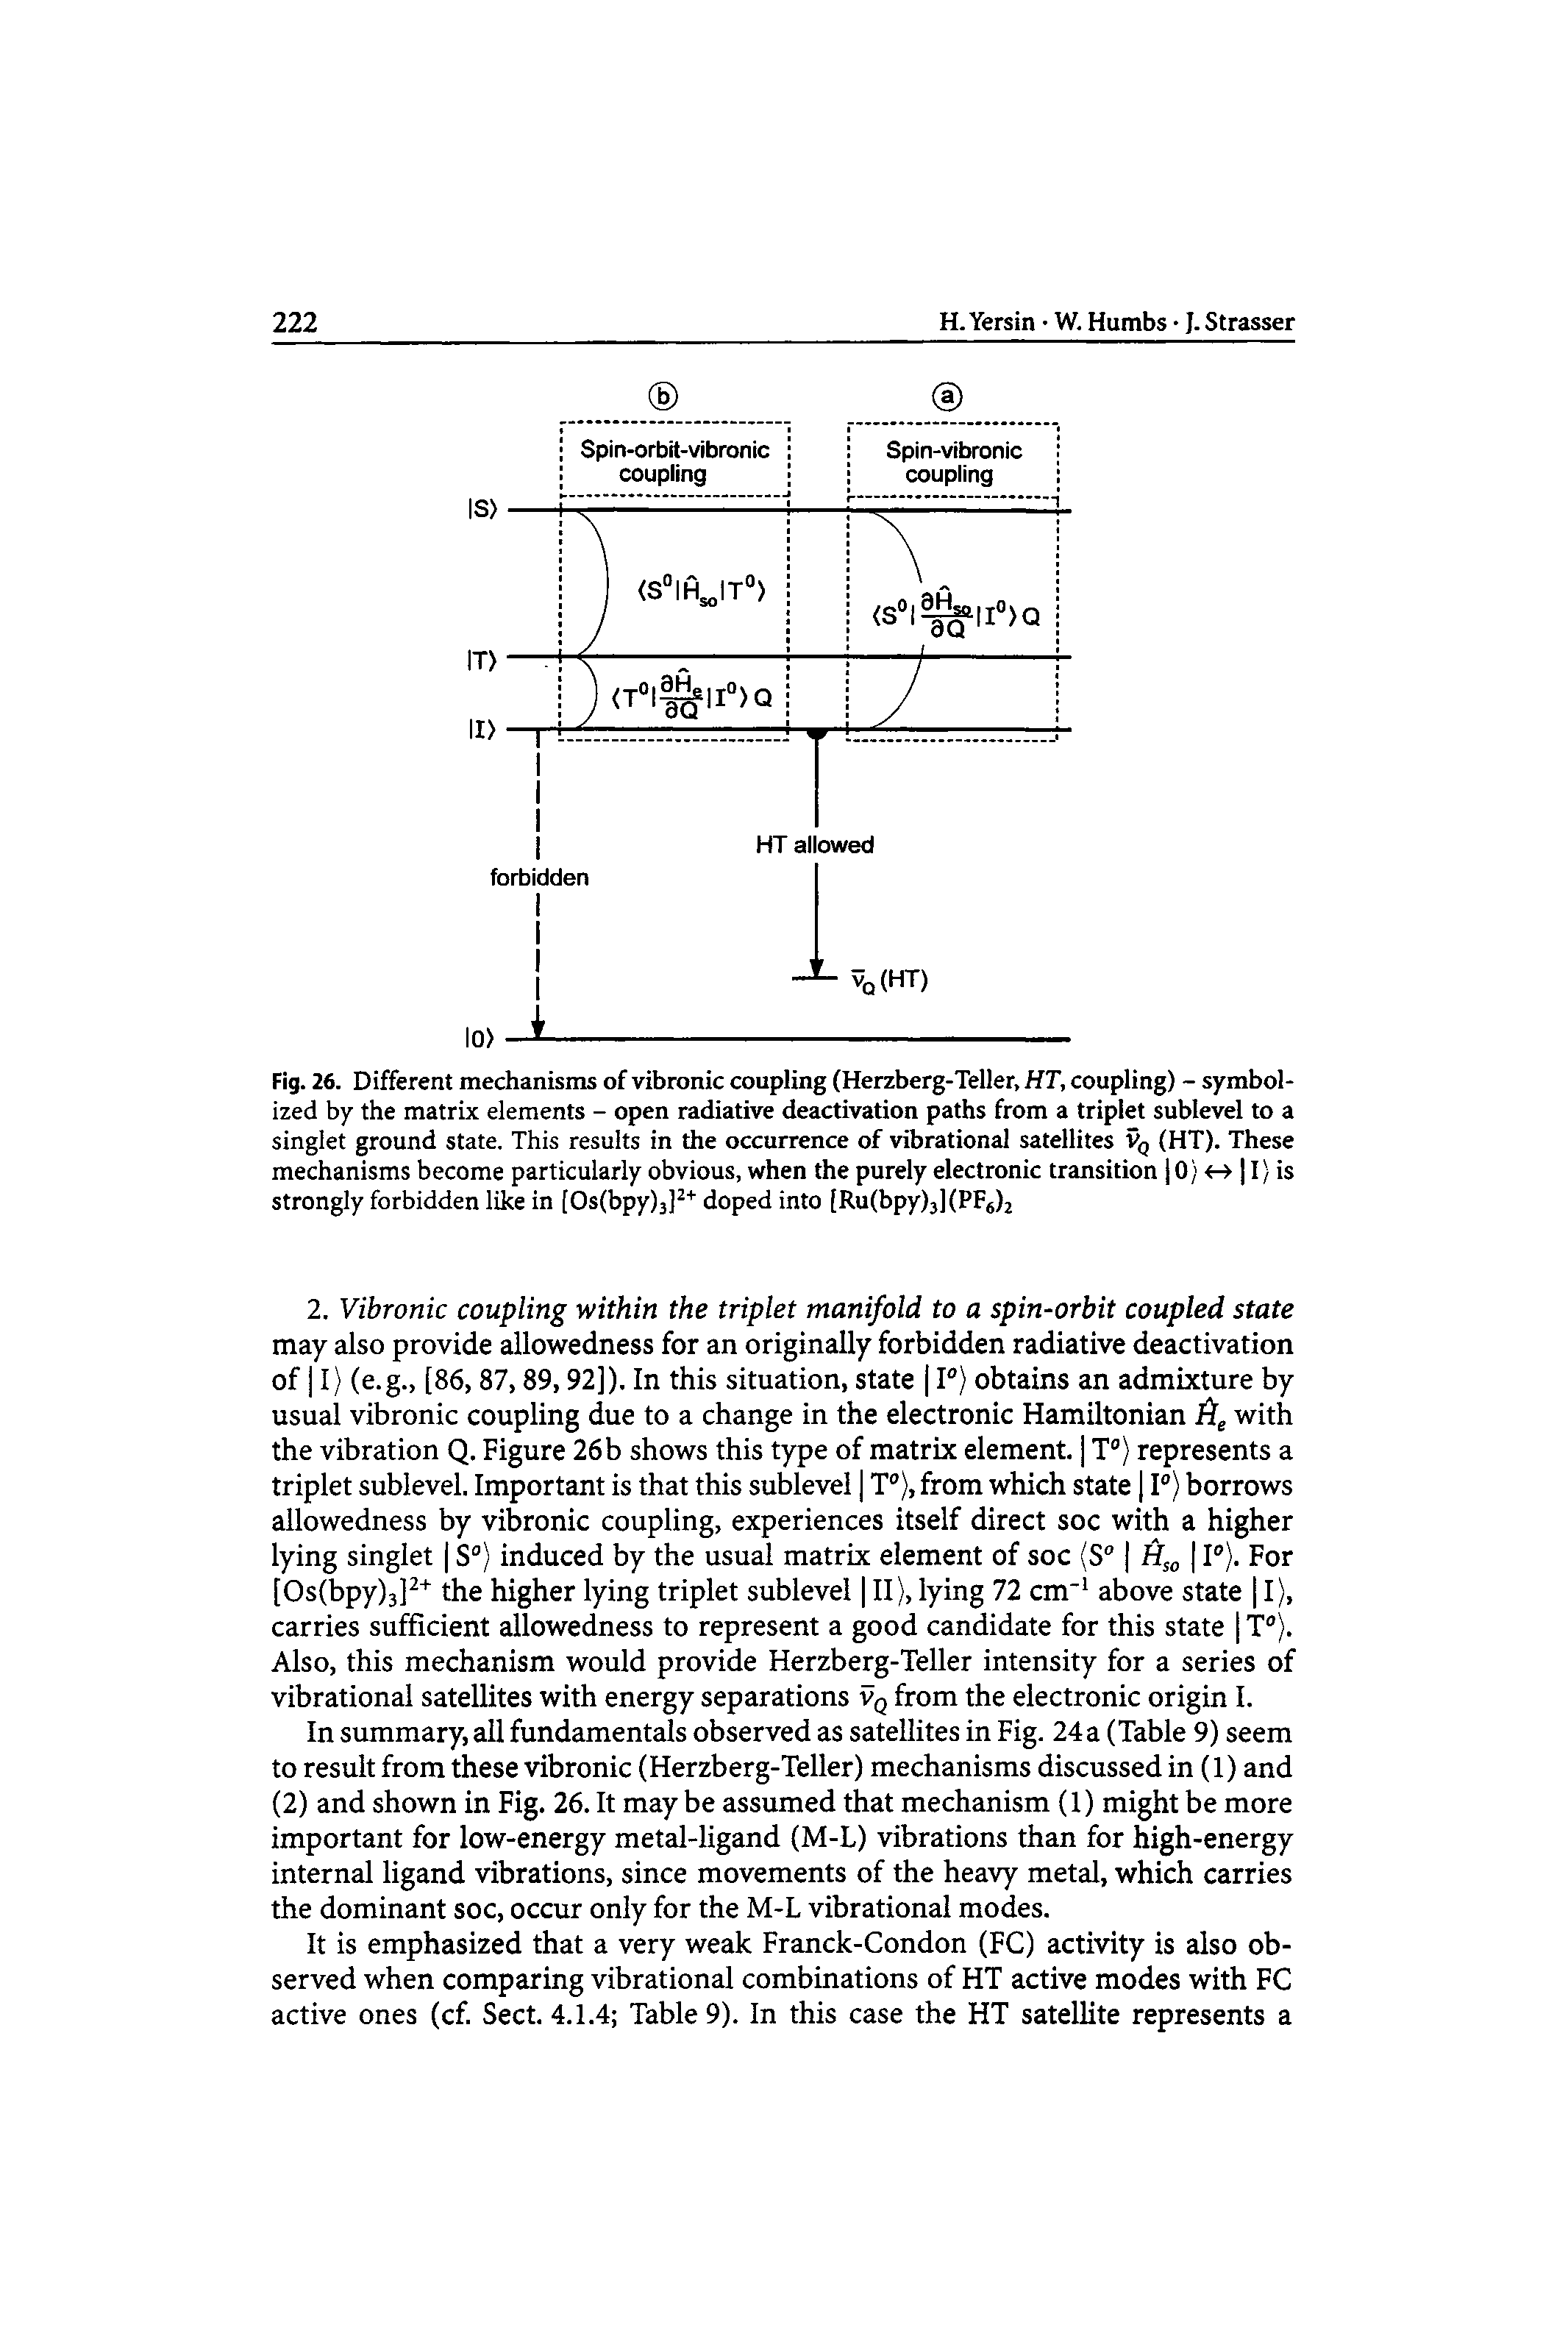 Fig. 26. Different mechanisms of vibronic coupling (Herzberg-Teller, HT, coupling) - symbolized by the matrix elements - open radiative deactivation paths from a triplet sublevel to a singlet ground state. This results in the occurrence of vibrational satellites Vq (HT). These mechanisms become particularly obvious, when the purely electronic transition JO) I) is strongly forbidden like in [Os(bpy)3] doped into [Ru(bpy)j](PFj)2...